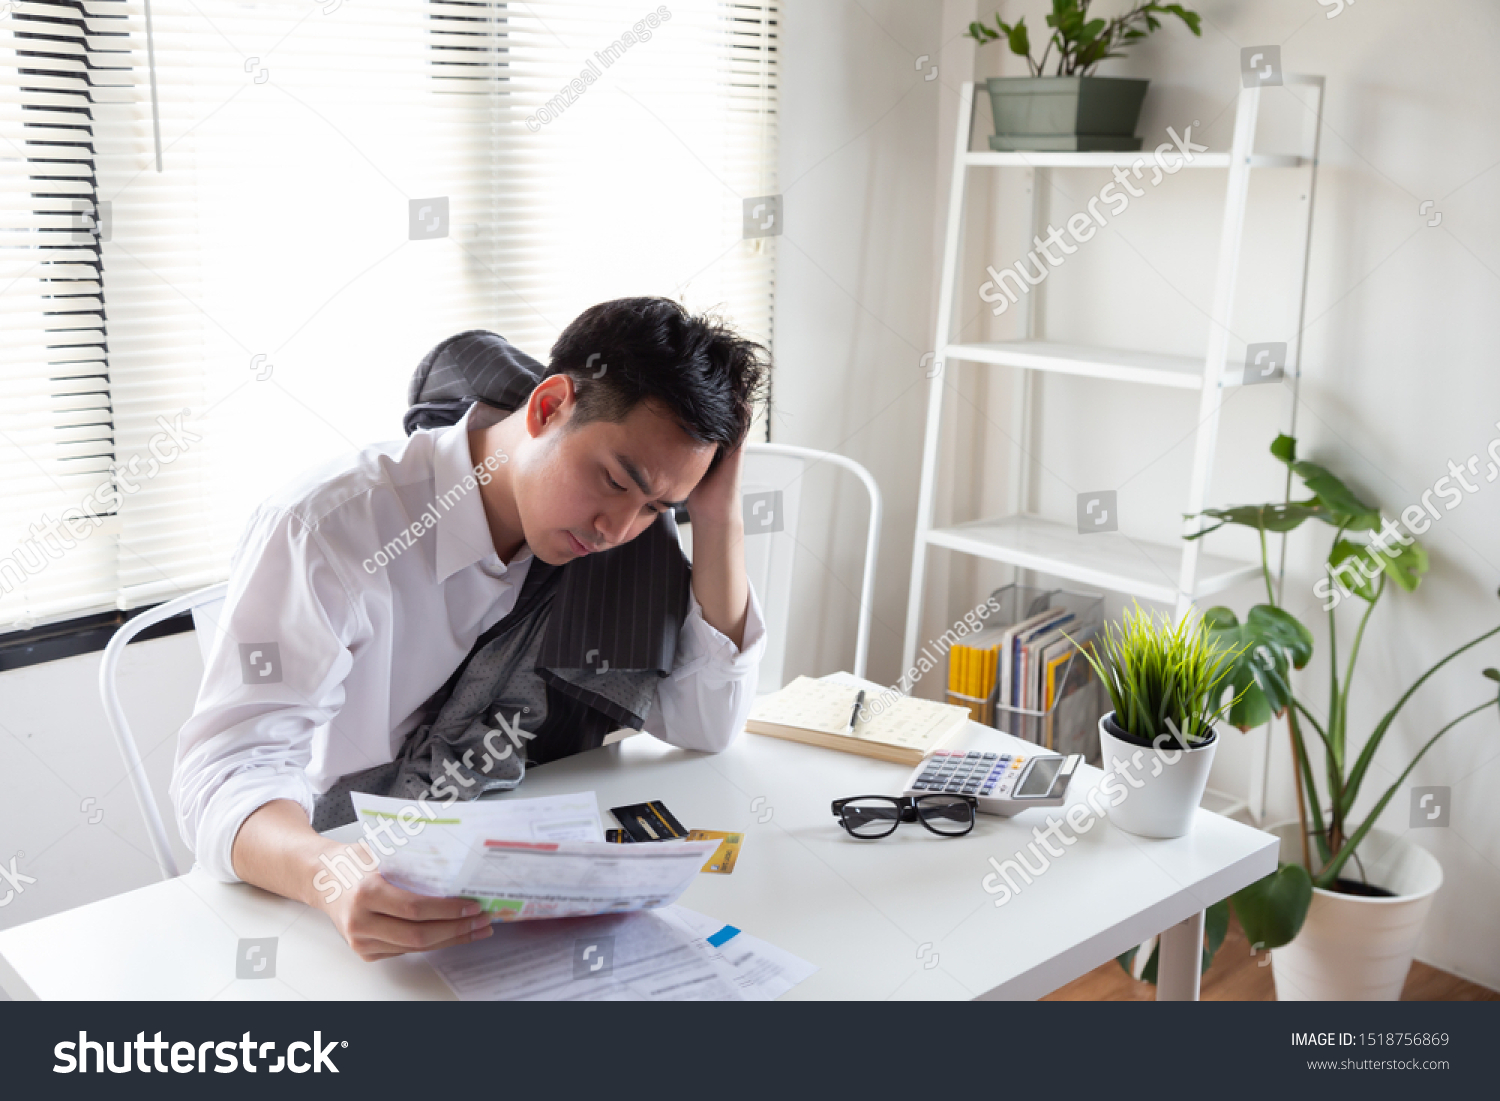 Sad confused and stressed of young Asian man holding bills letter of credit card debt, Financial money problem and tax invoice notification concept #1518756869